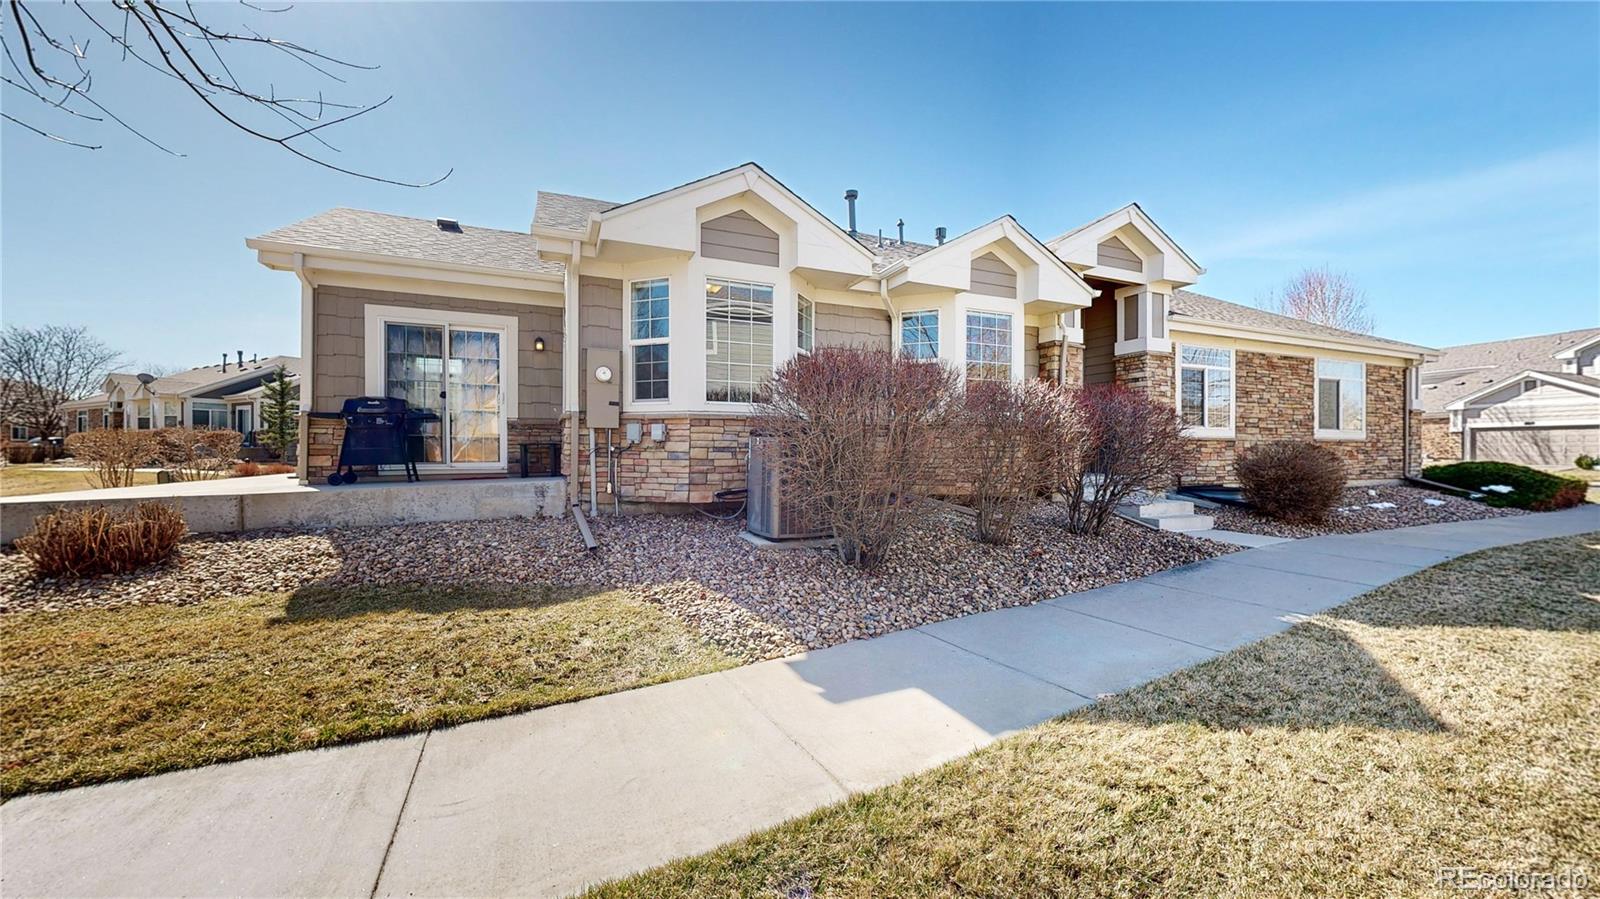 13714  stone circle, Broomfield sold home. Closed on 2024-04-12 for $605,000.